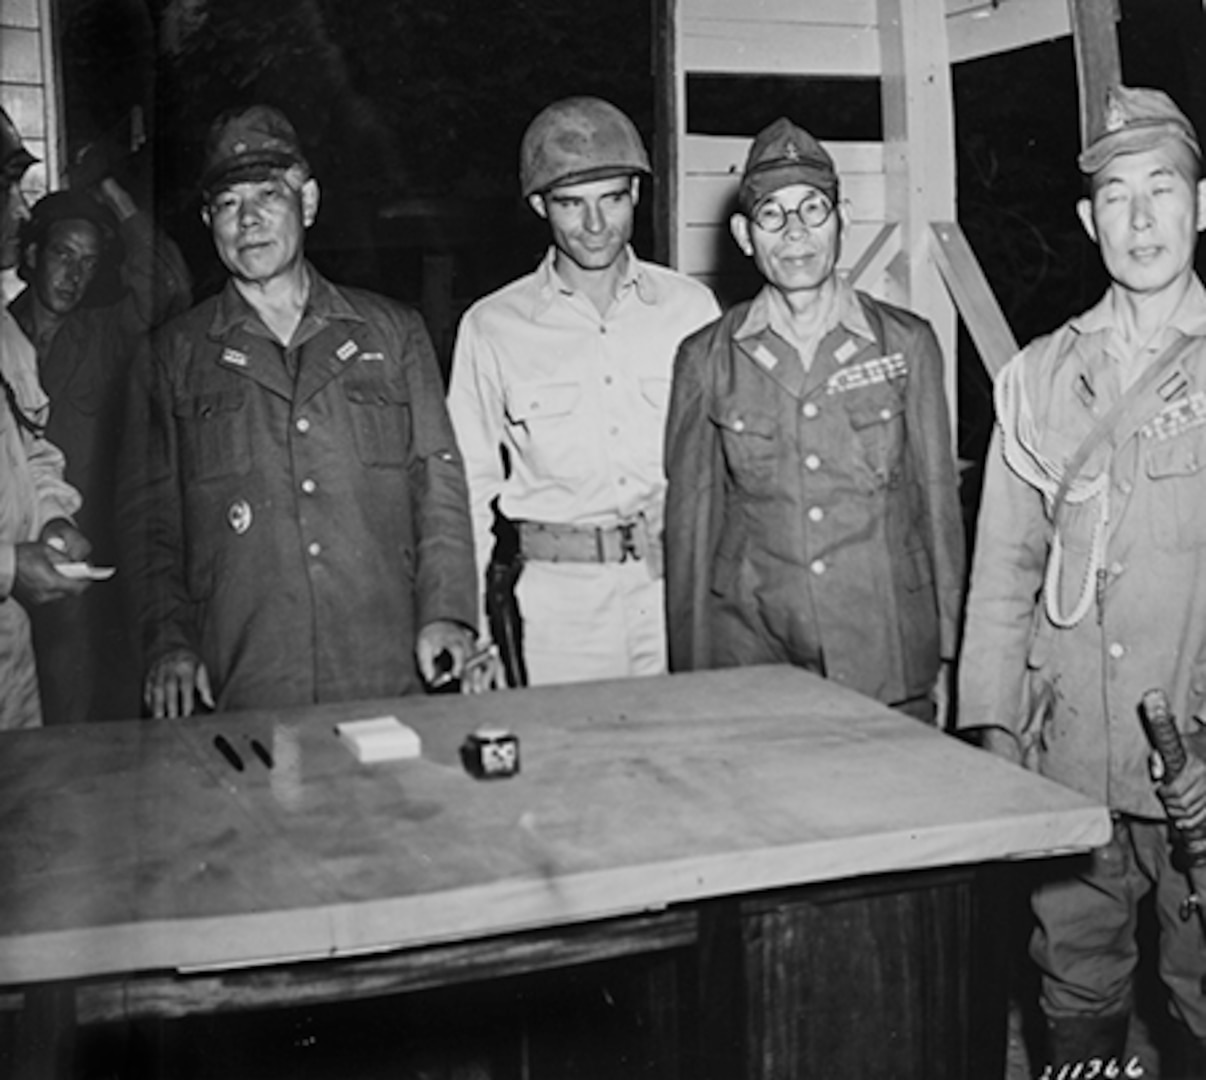 Defiant to the very end and refusing to capitulate until Japan formally surrendered in Tokyo, Gen. Tomoyuki Yamashita, commander of all Japanese forces in the Philippines, is shown Sept. 2, 1945, as he surrenders the battered remnants of his once-formidable forces to the 32nd “Red Arrow” Division at Kiangan in northern Luzon, Philippine Islands. From left to right: Col. Ernest Barlow, 32nd Division chief of staff; Gen. Tomoyuki Yamashita; Lt. Col. Alex Robinet, 128th Infantry Regiment executive officer; and two members of Yamashita’s staff. Yamashita signed surrender documents the following day.